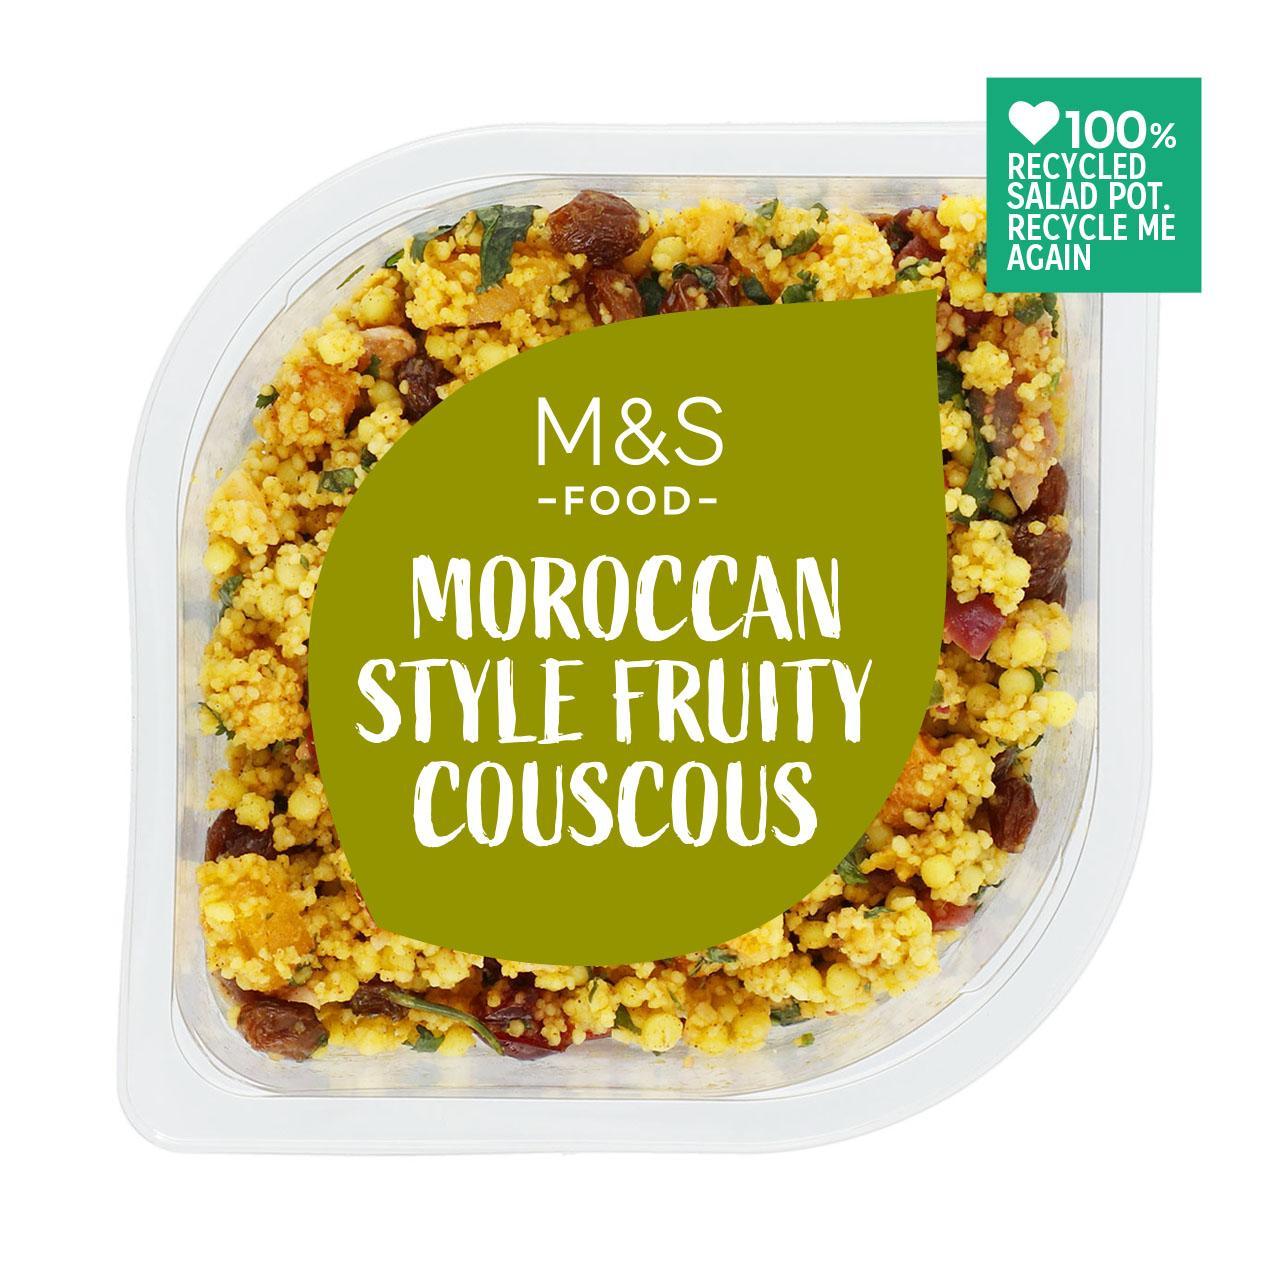 M&S Moroccan Style Fruity Couscous